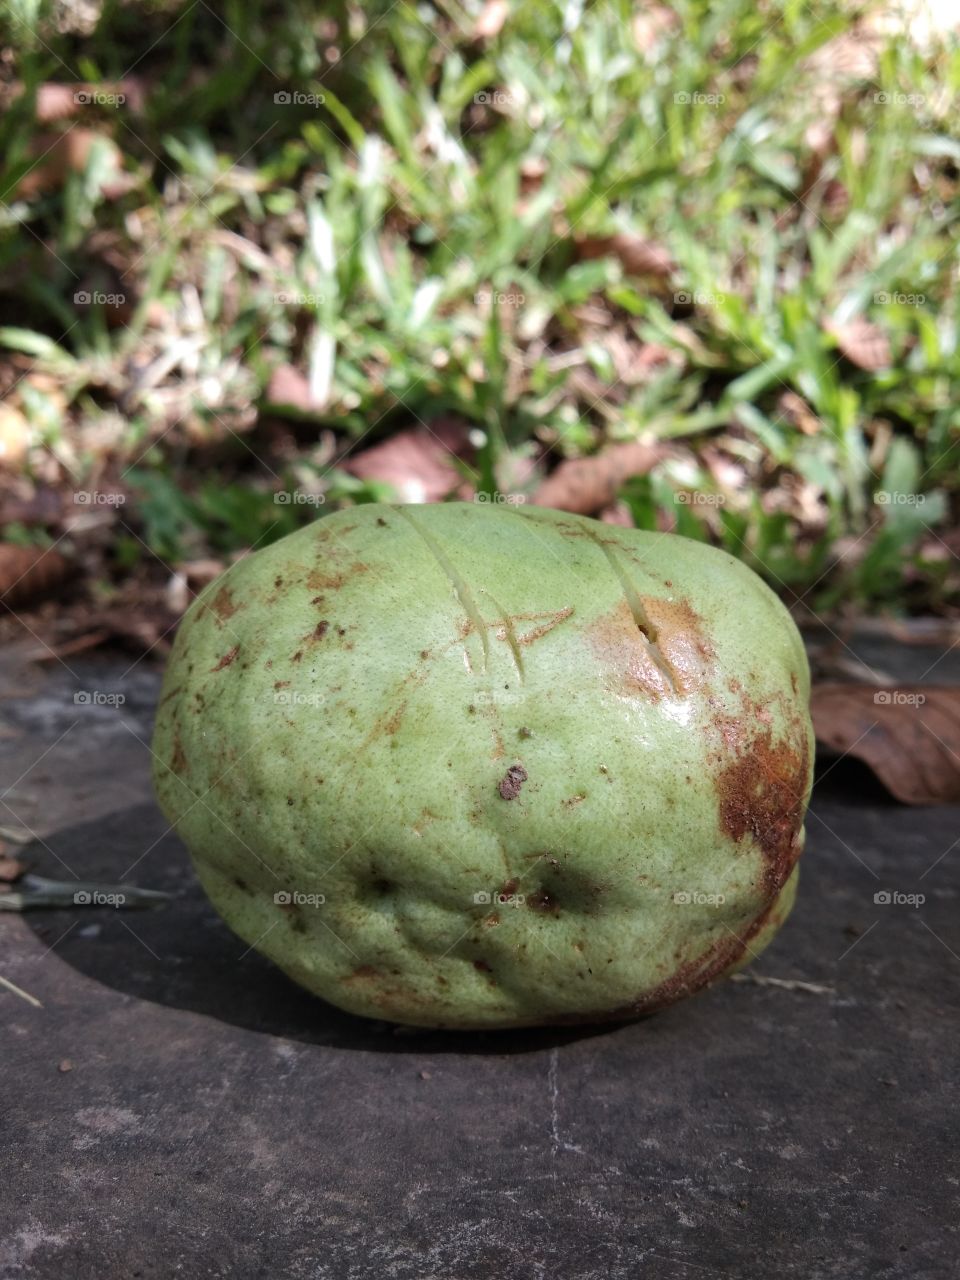 guava fruit falls on the road